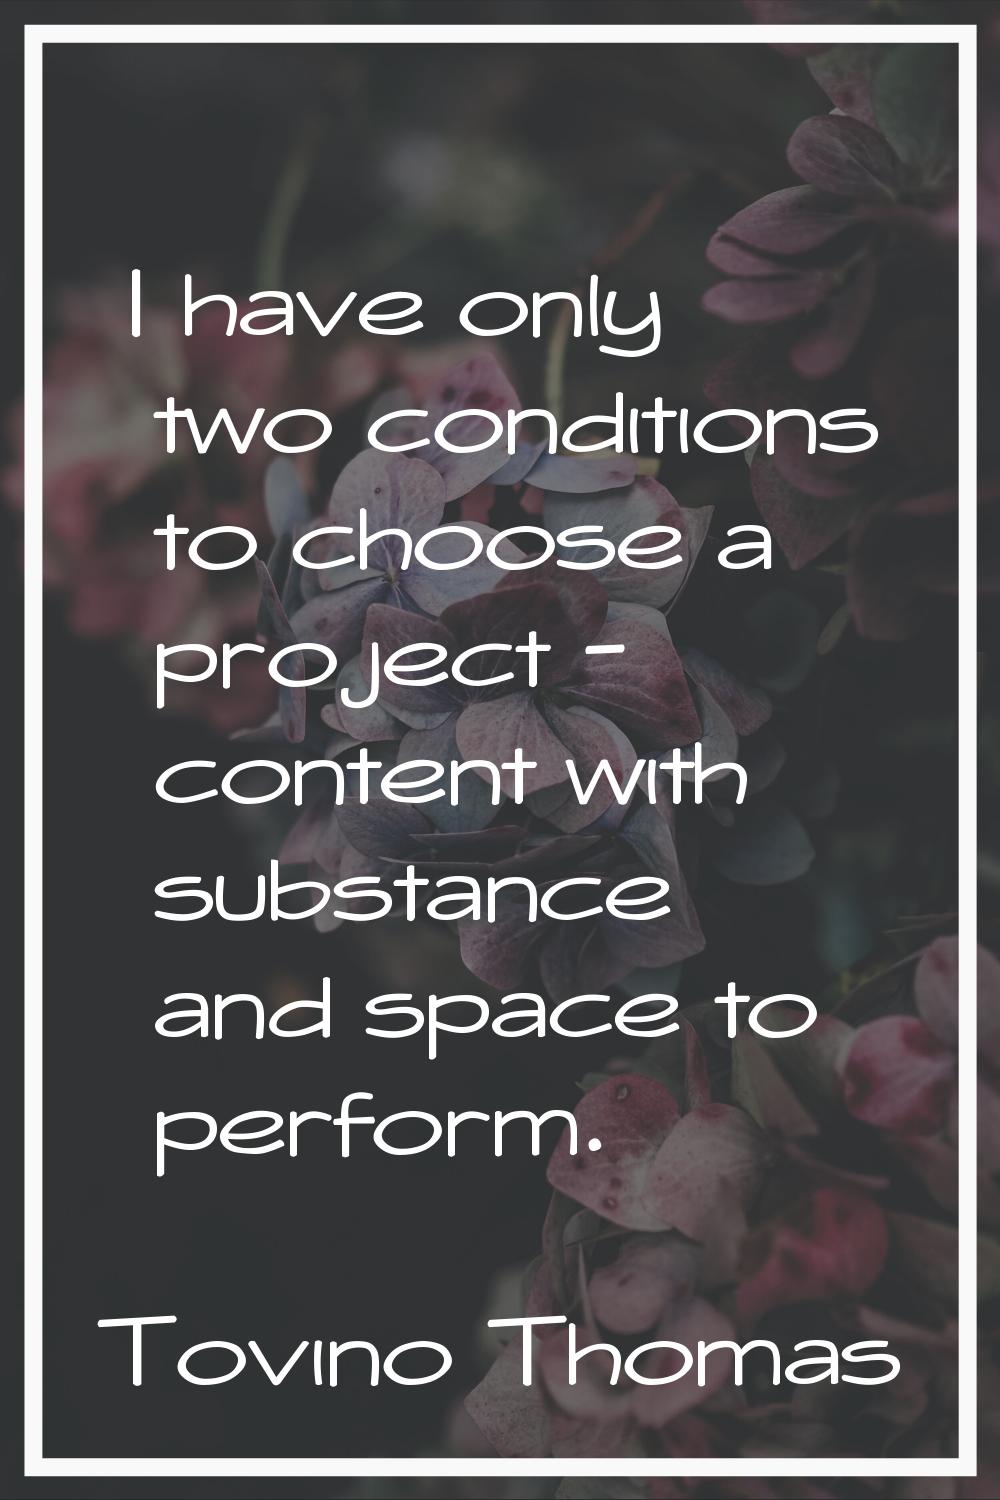 I have only two conditions to choose a project - content with substance and space to perform.